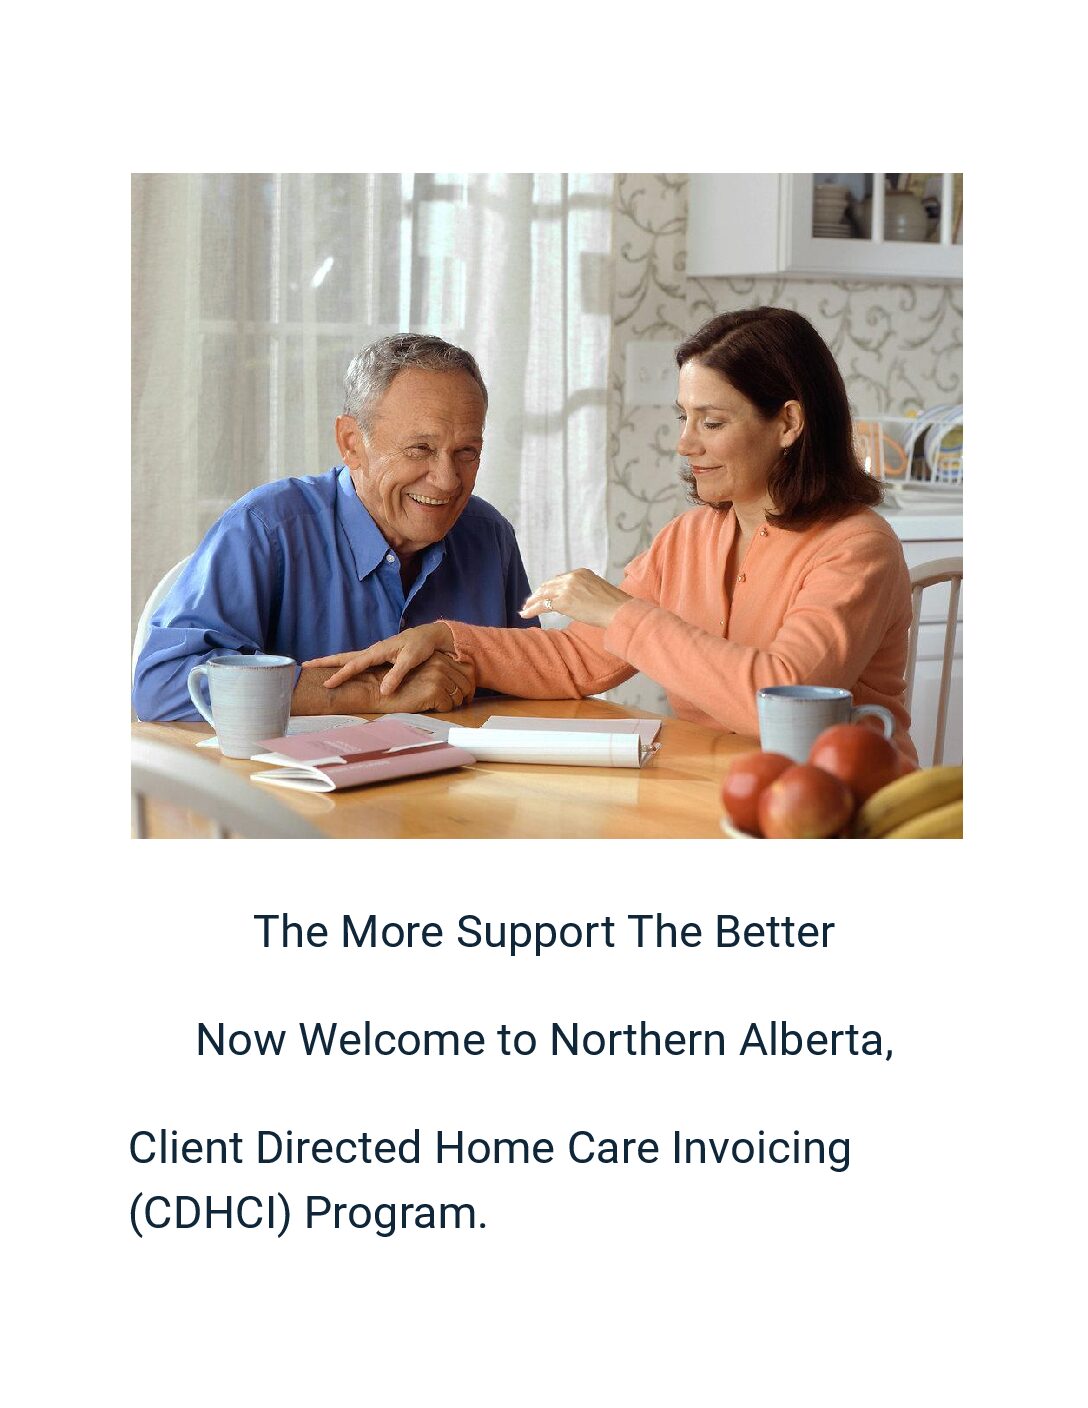 New Client Directed Home Care Invoicing Program